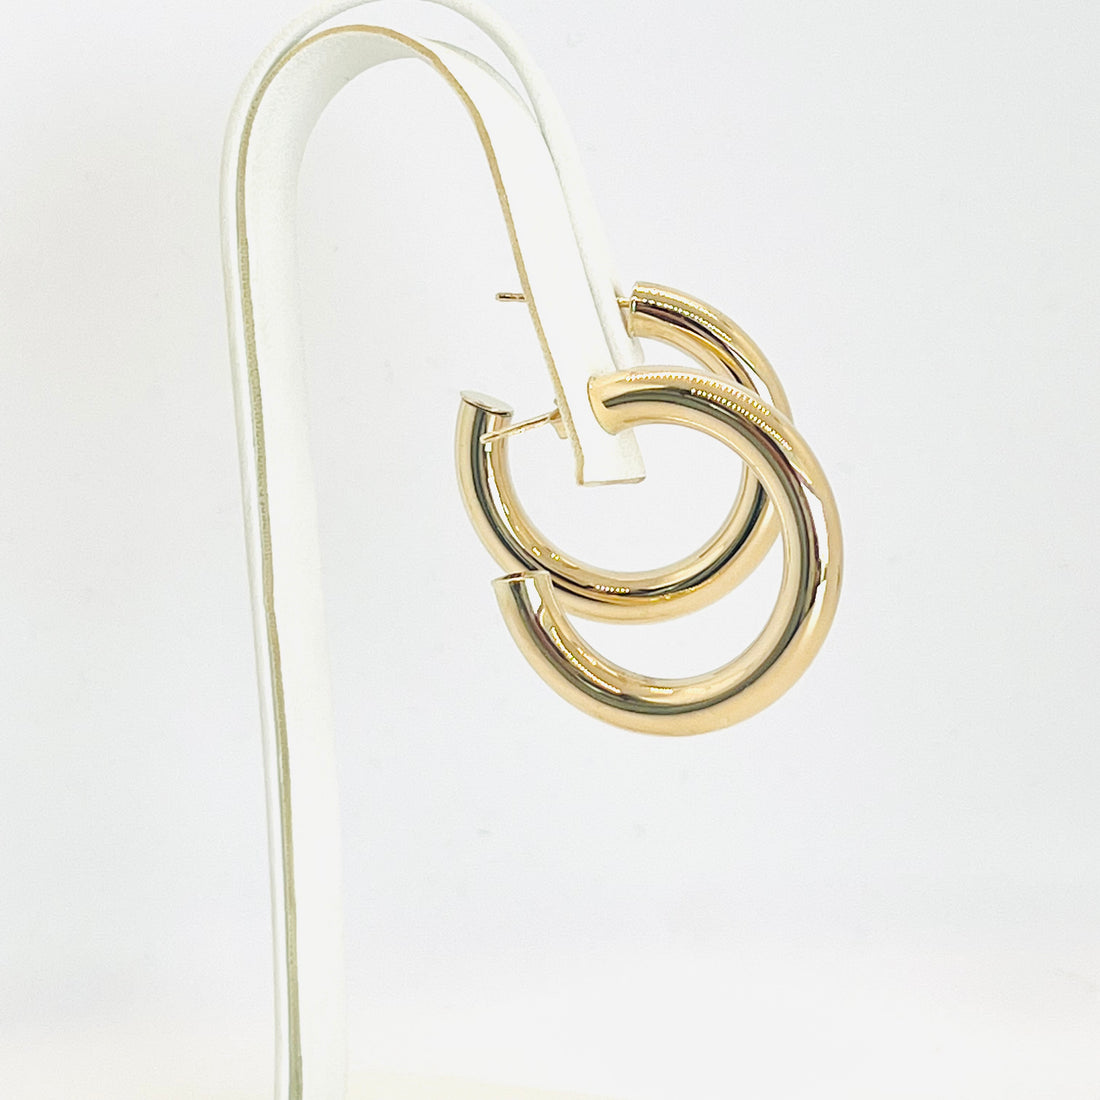 classic 14k yellow gold hoops